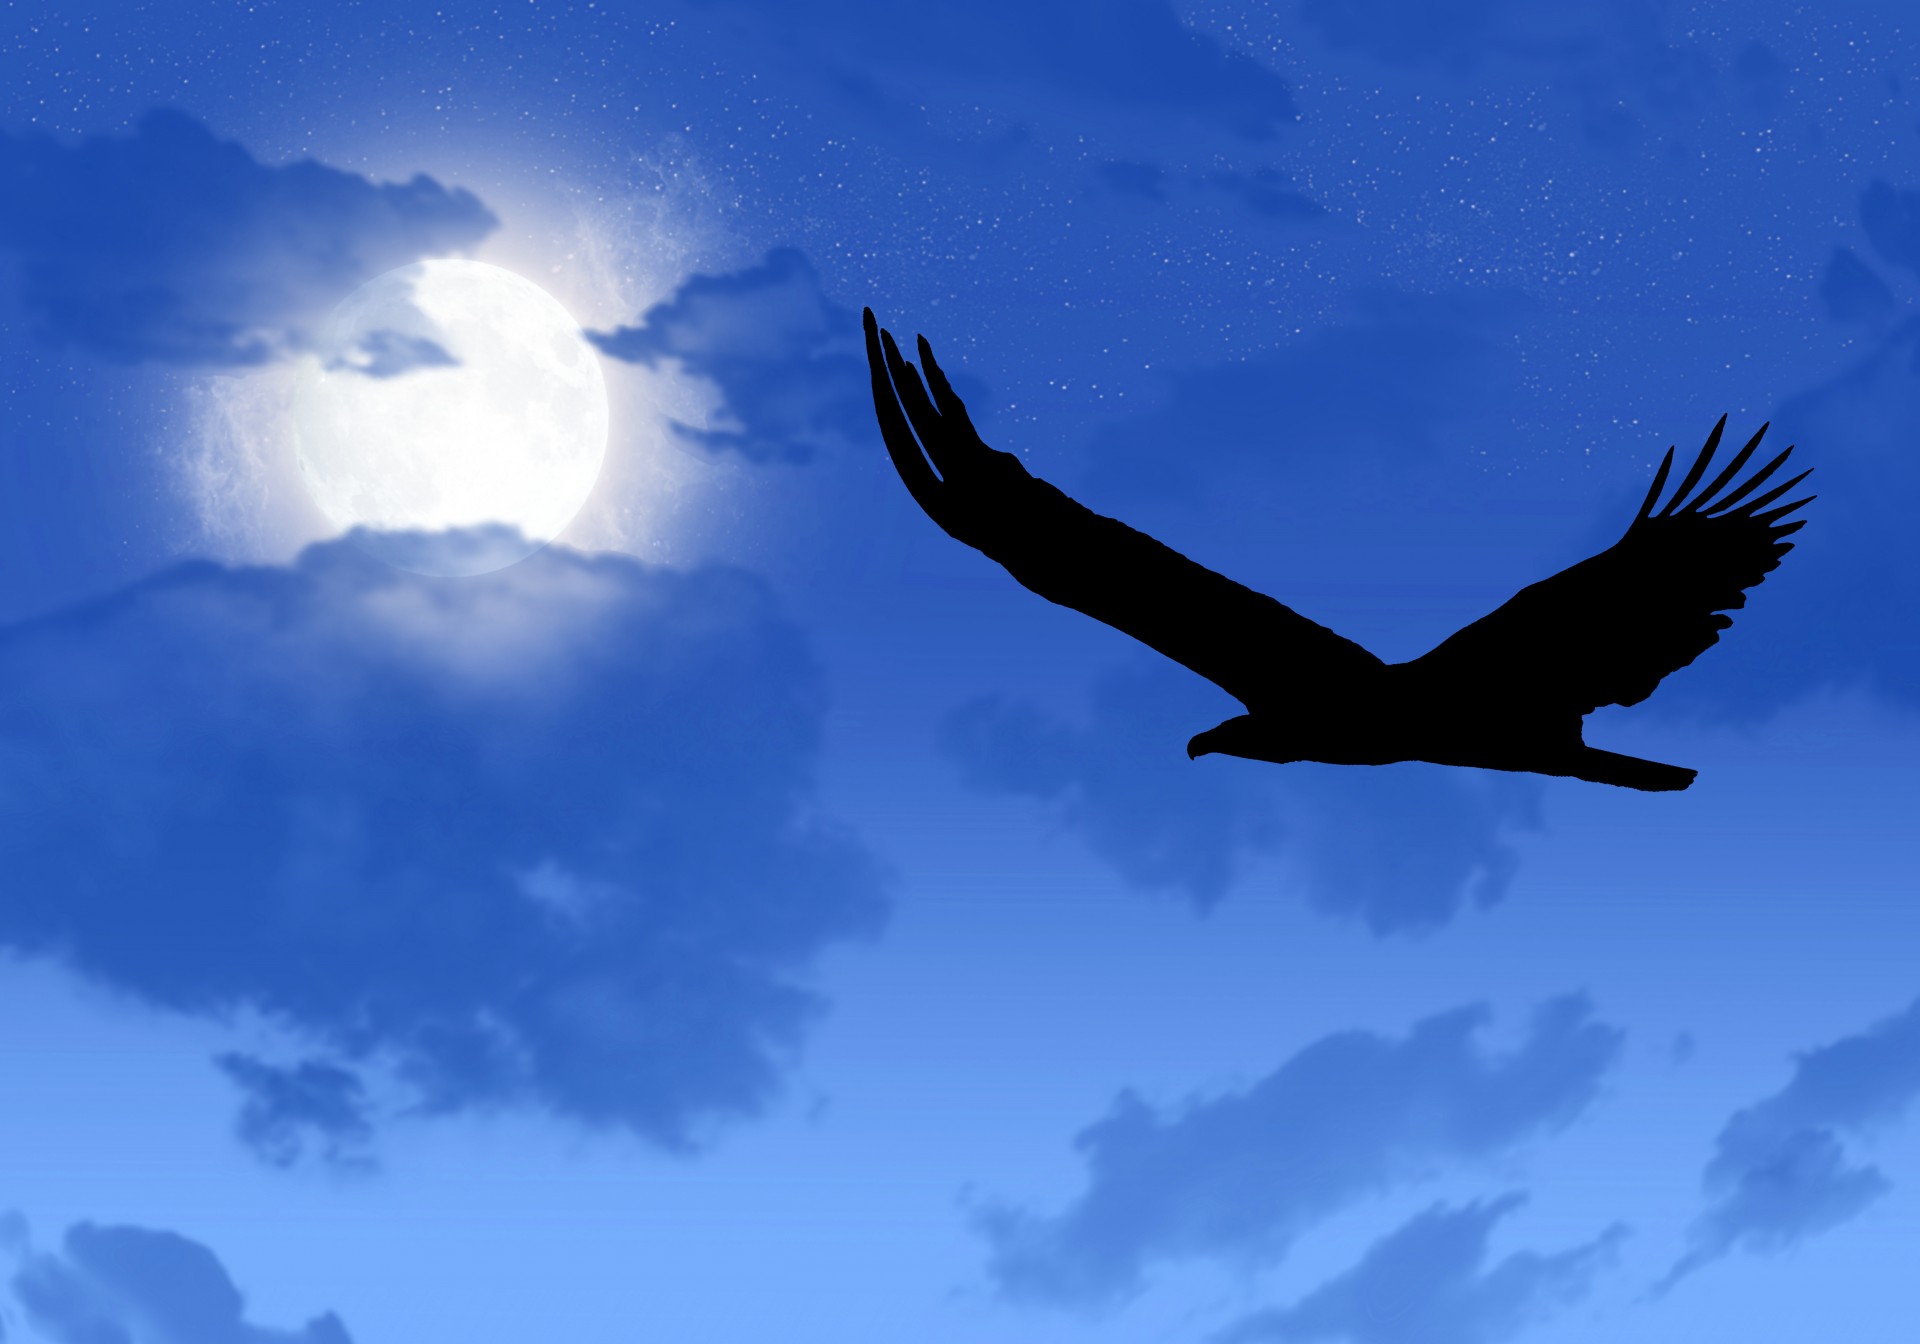 Illustration of starry night with eagle silhouette